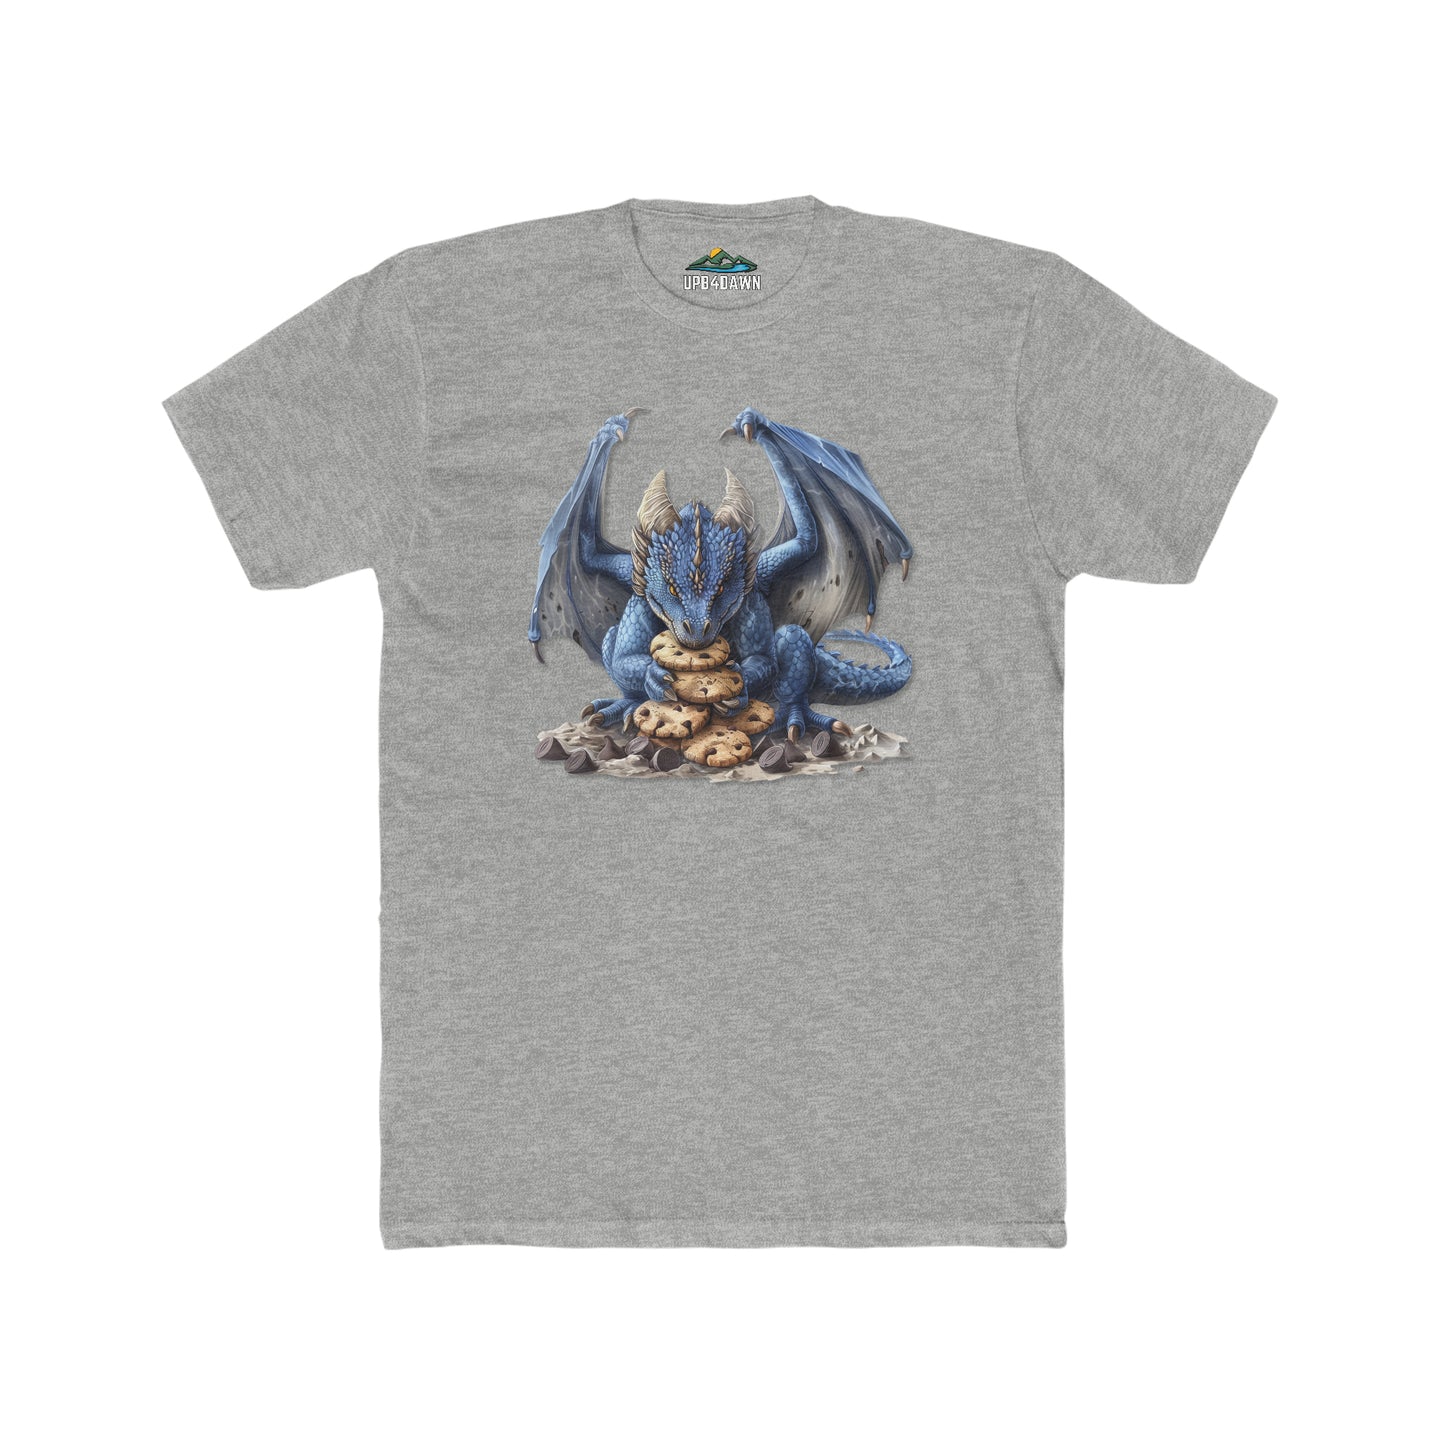 A Custom - Men's Cotton Crew Tee - Blue Dragon 1 with a graphic print of a blue dragon sitting atop a pile of gold and jewels. The shirt has a small green triangular logo at the top.